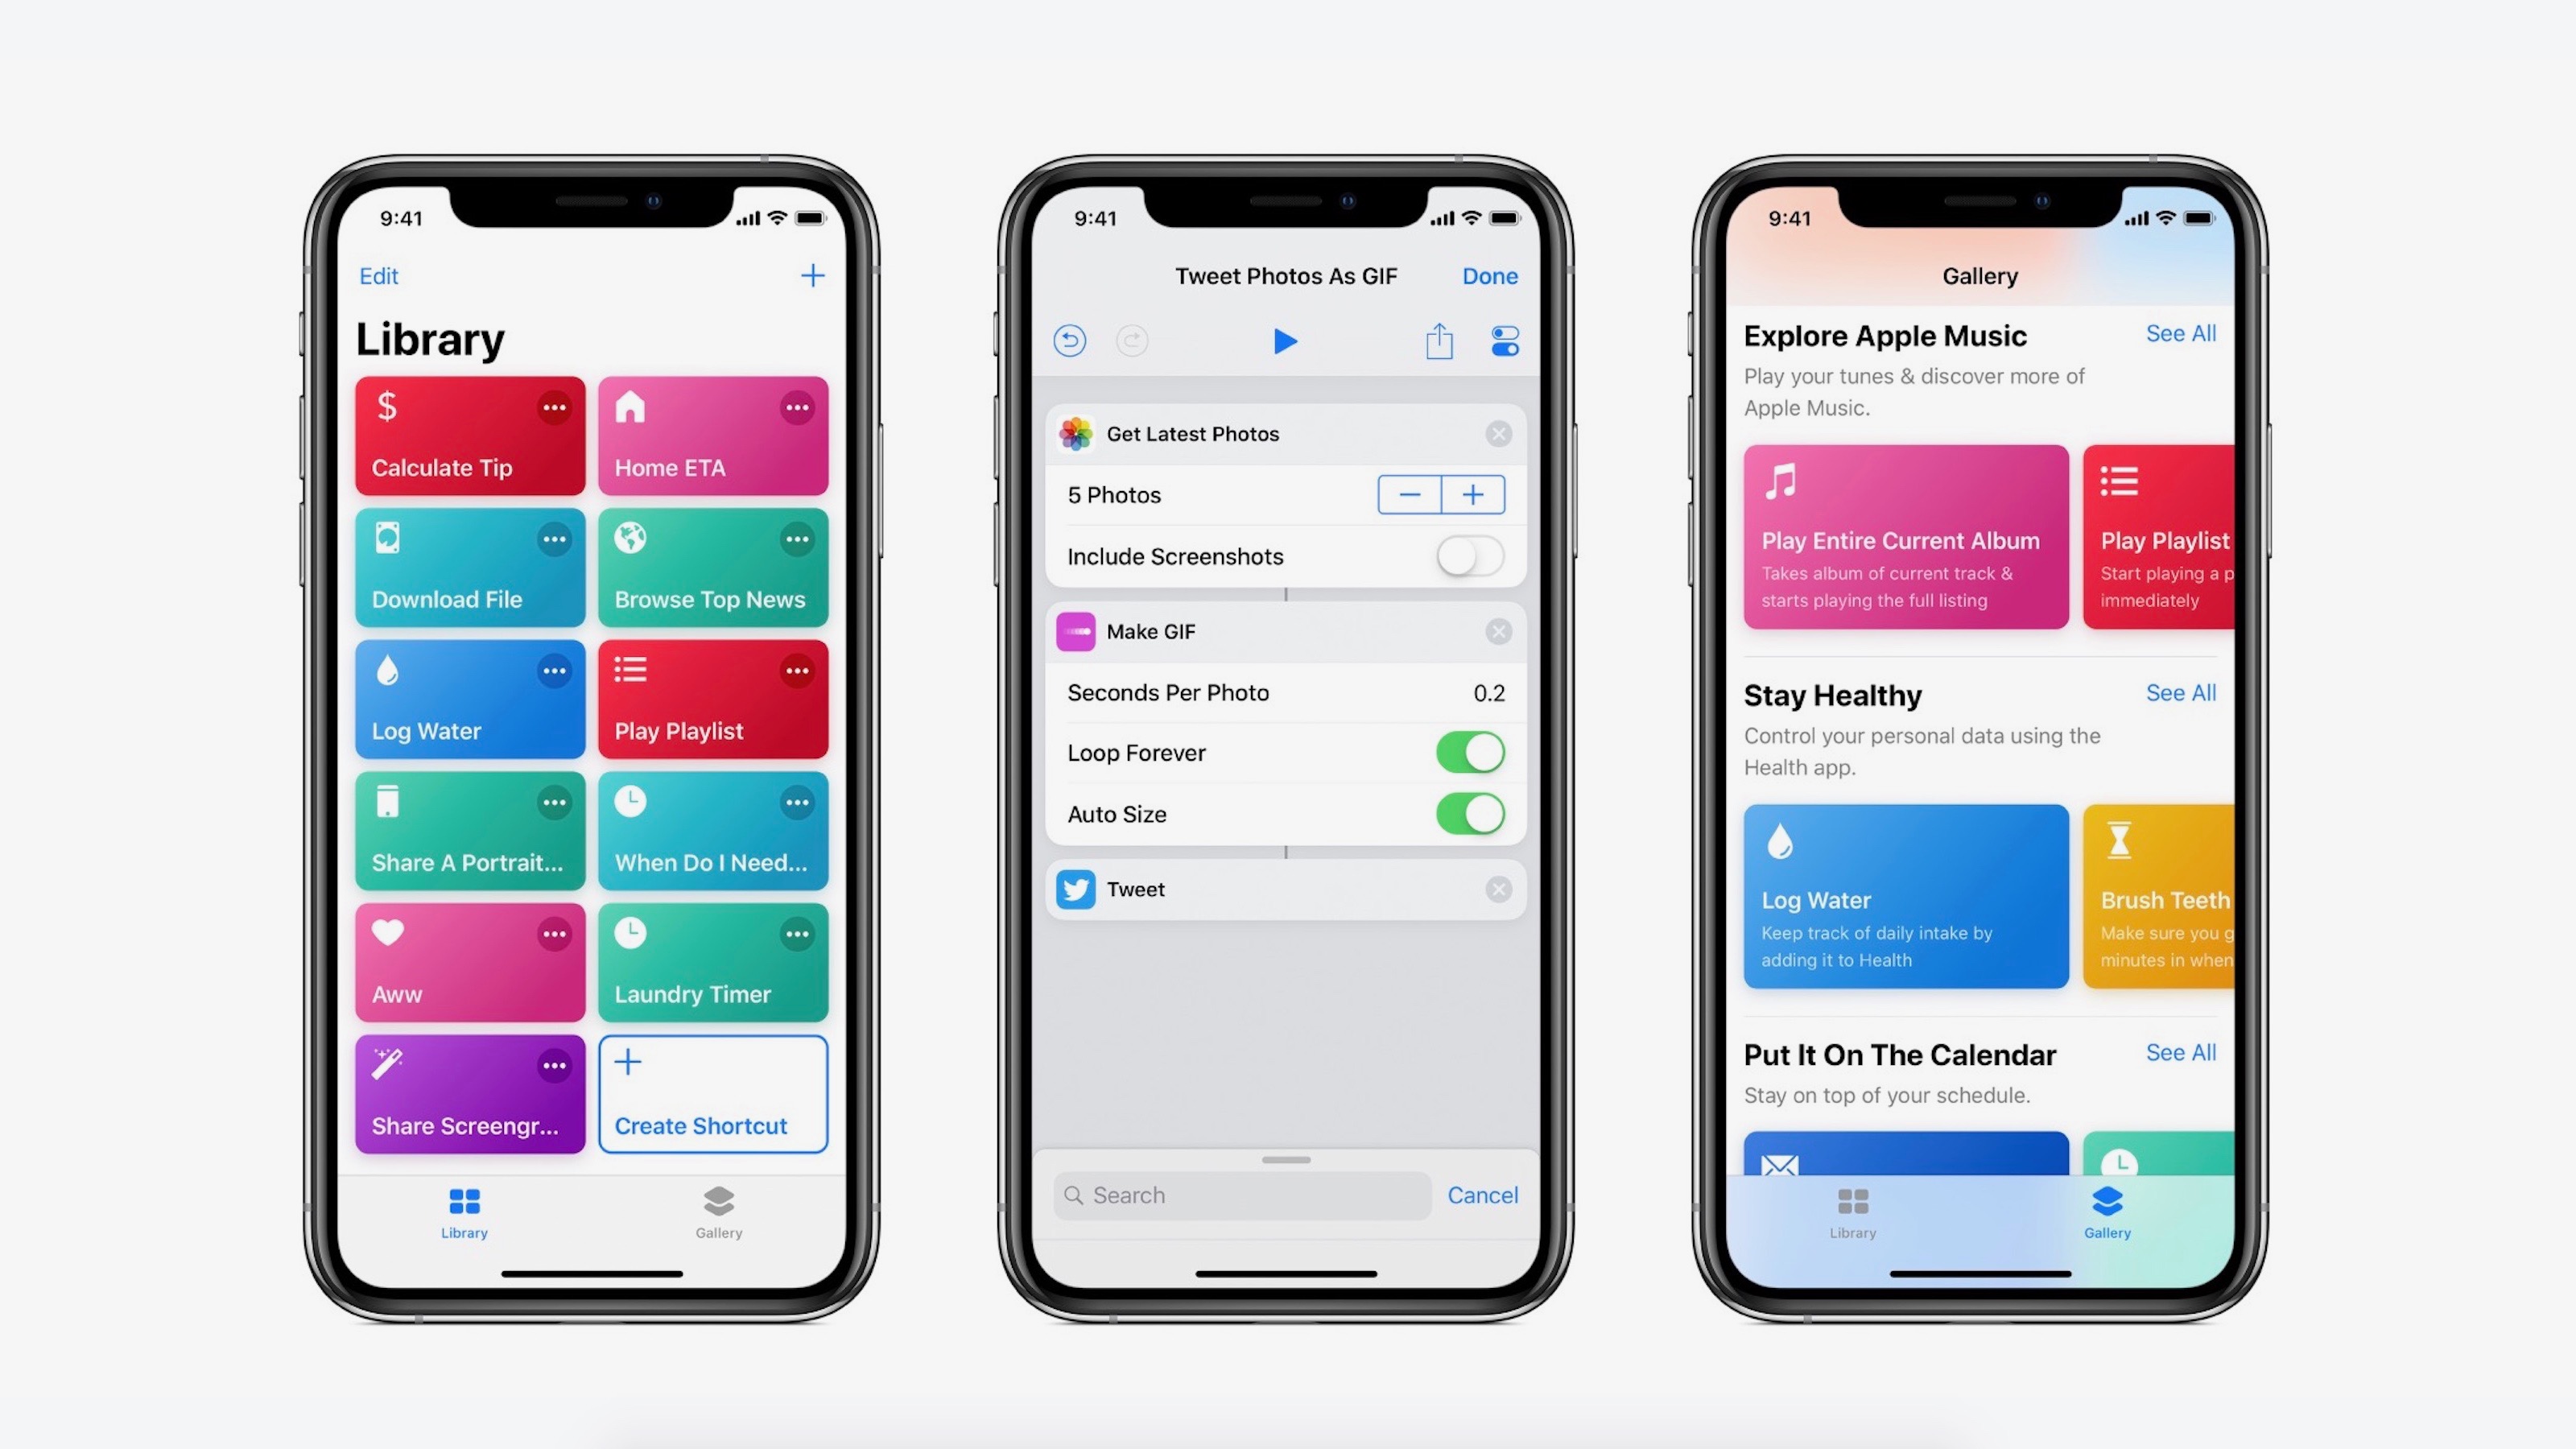 MacStories shares robust library of 150 useful Shortcuts for the iOS